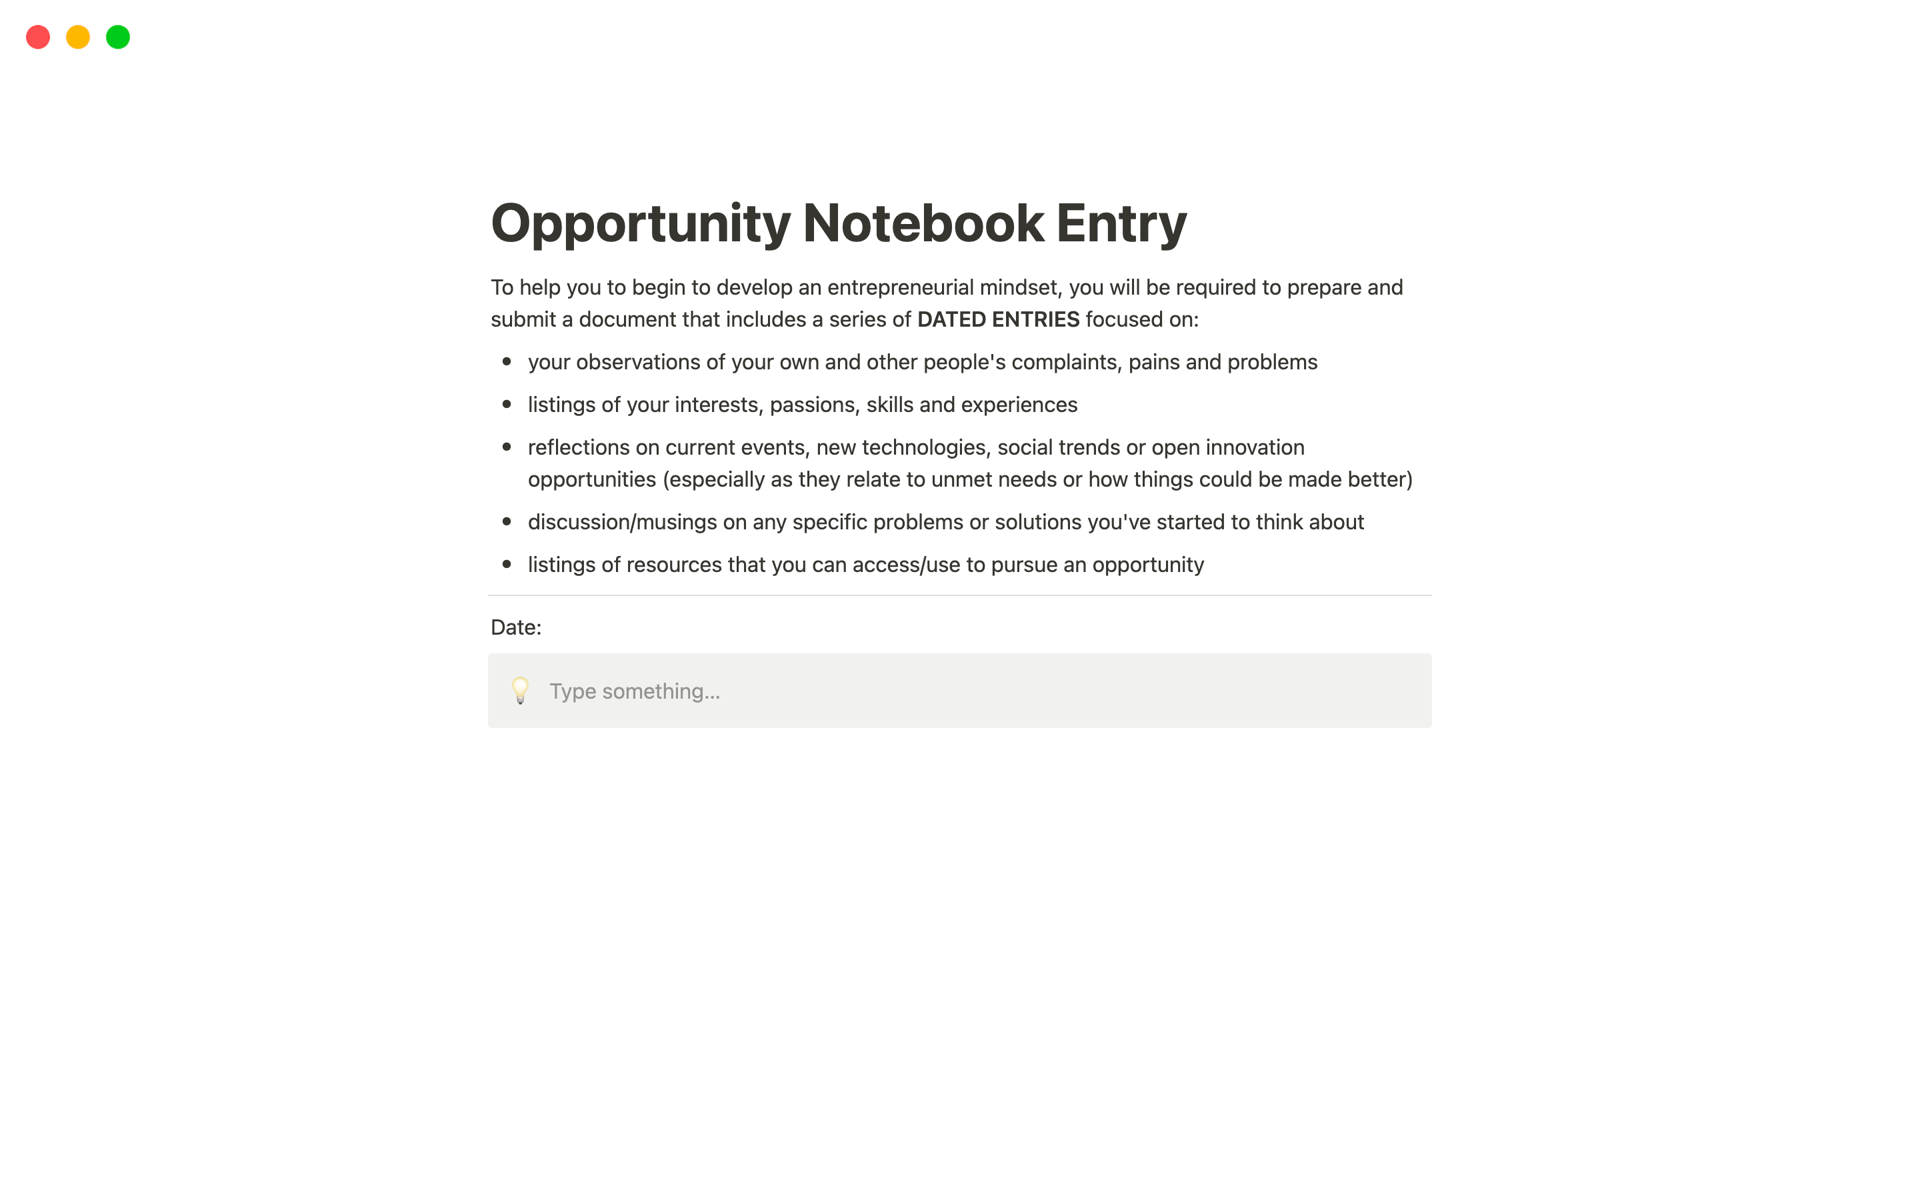 To help with your notebook entries.